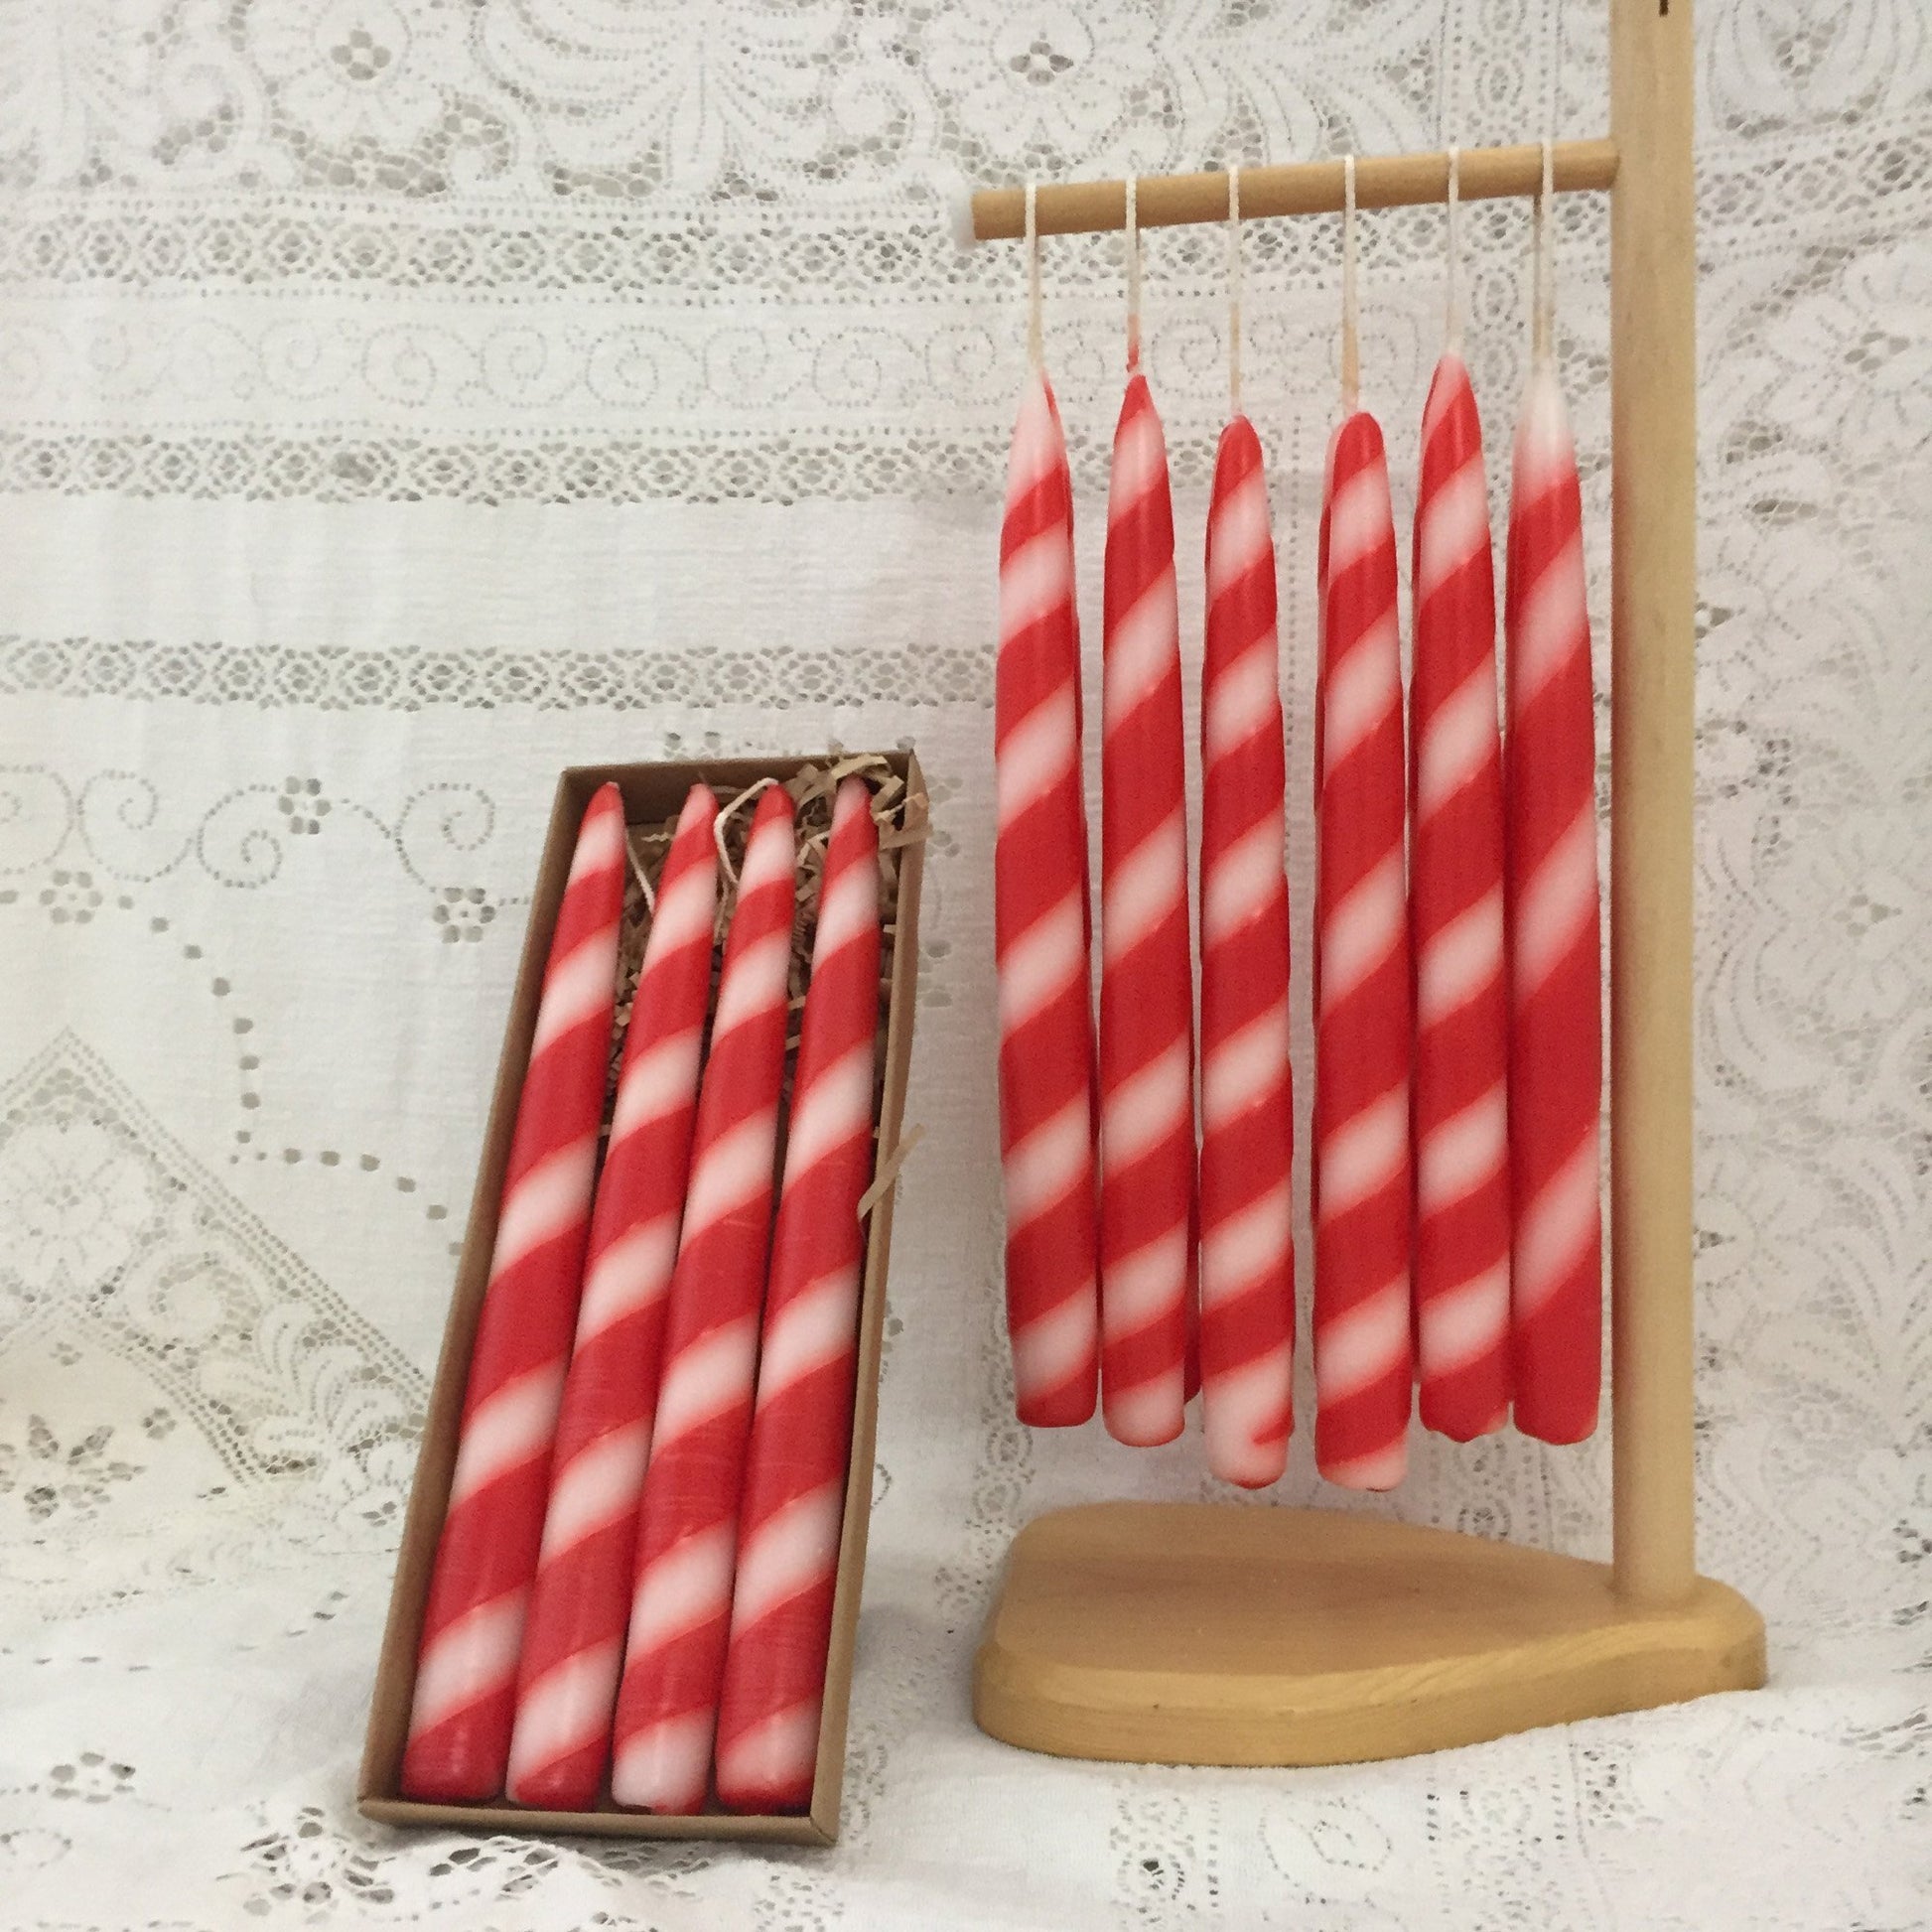 Candy Cane Taper candles, 7/8D x 10"H, Fragrance Free, 2 pair(4 singles) or 6 pair box - Fanny Bay Candle Company